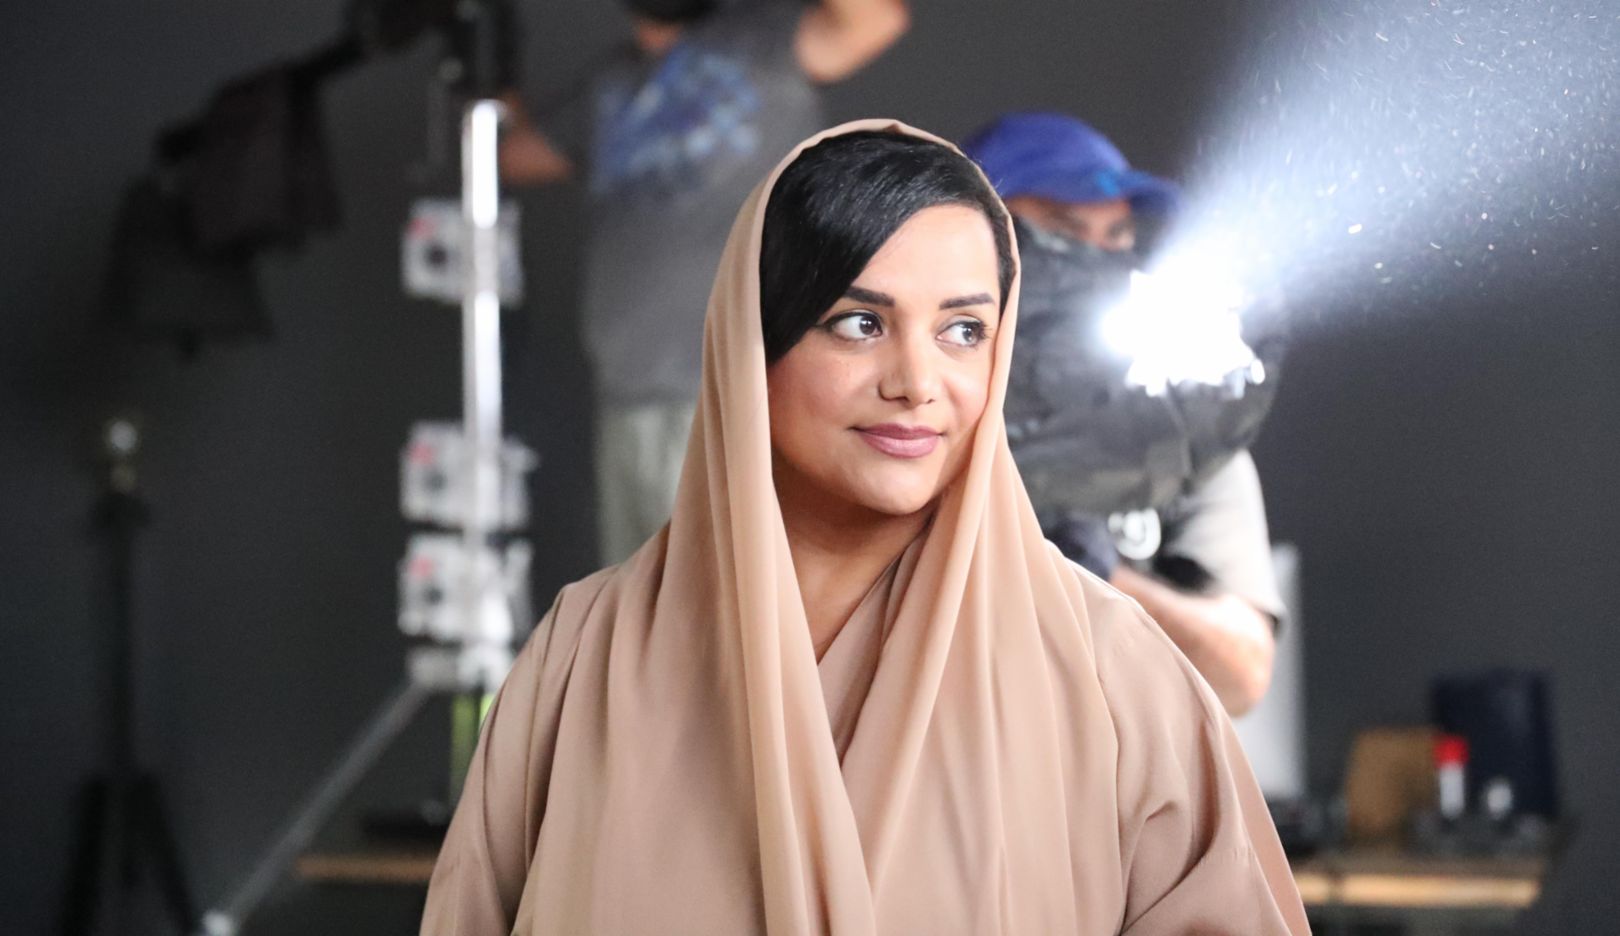 Entirely in her element: Nayla Al Khaja works with seasoned professionals on ambitious projects. She also promotes talented young filmmakers. Photo: Nayla Al Khaja Films